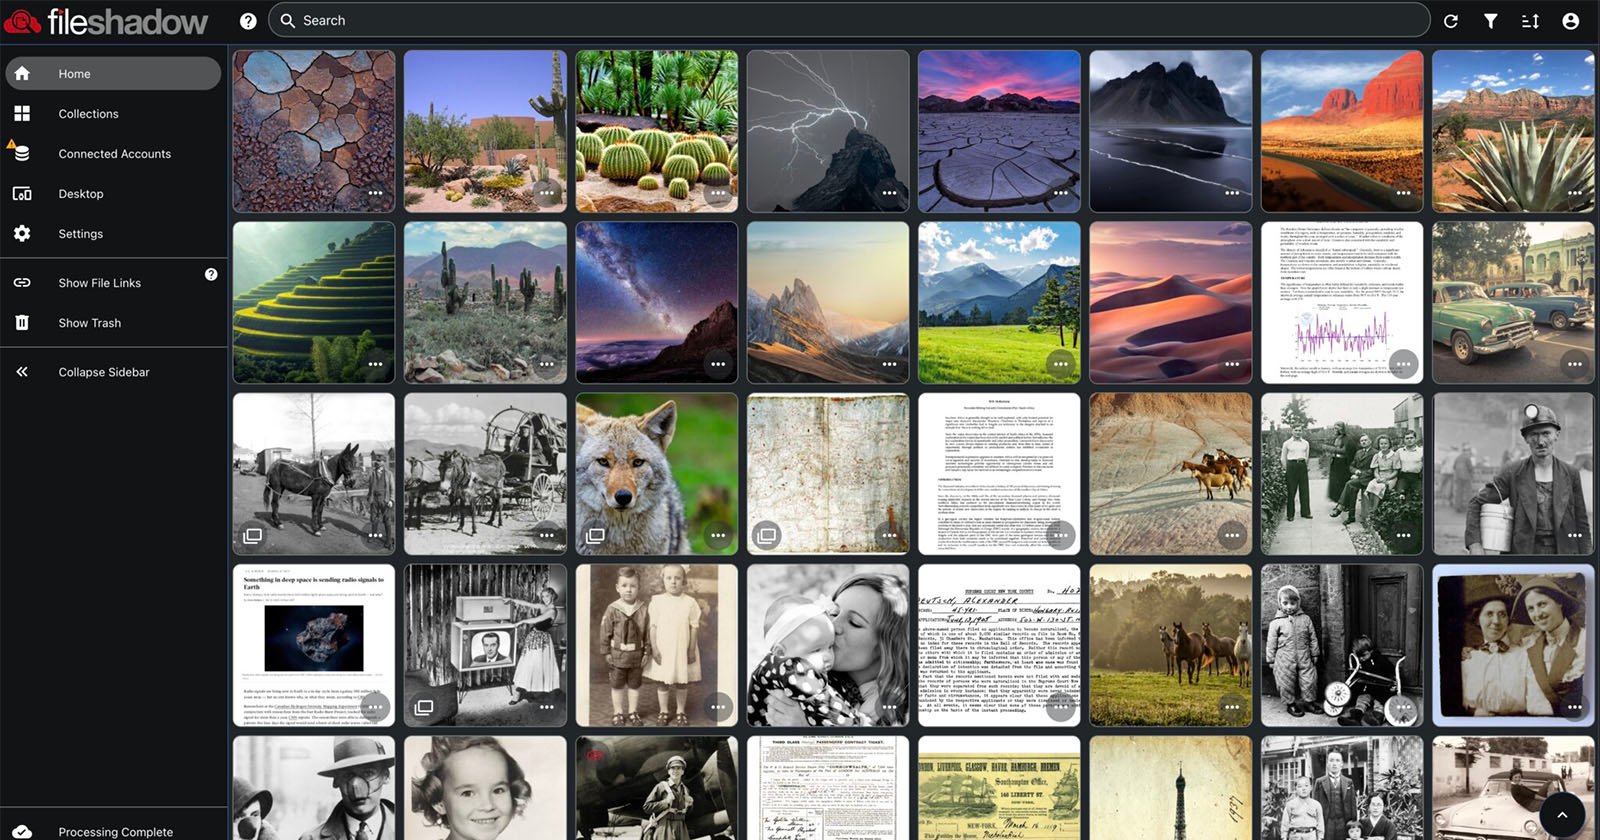 FileShadow Update Makes It Easier for Photographers to Find Specific Images